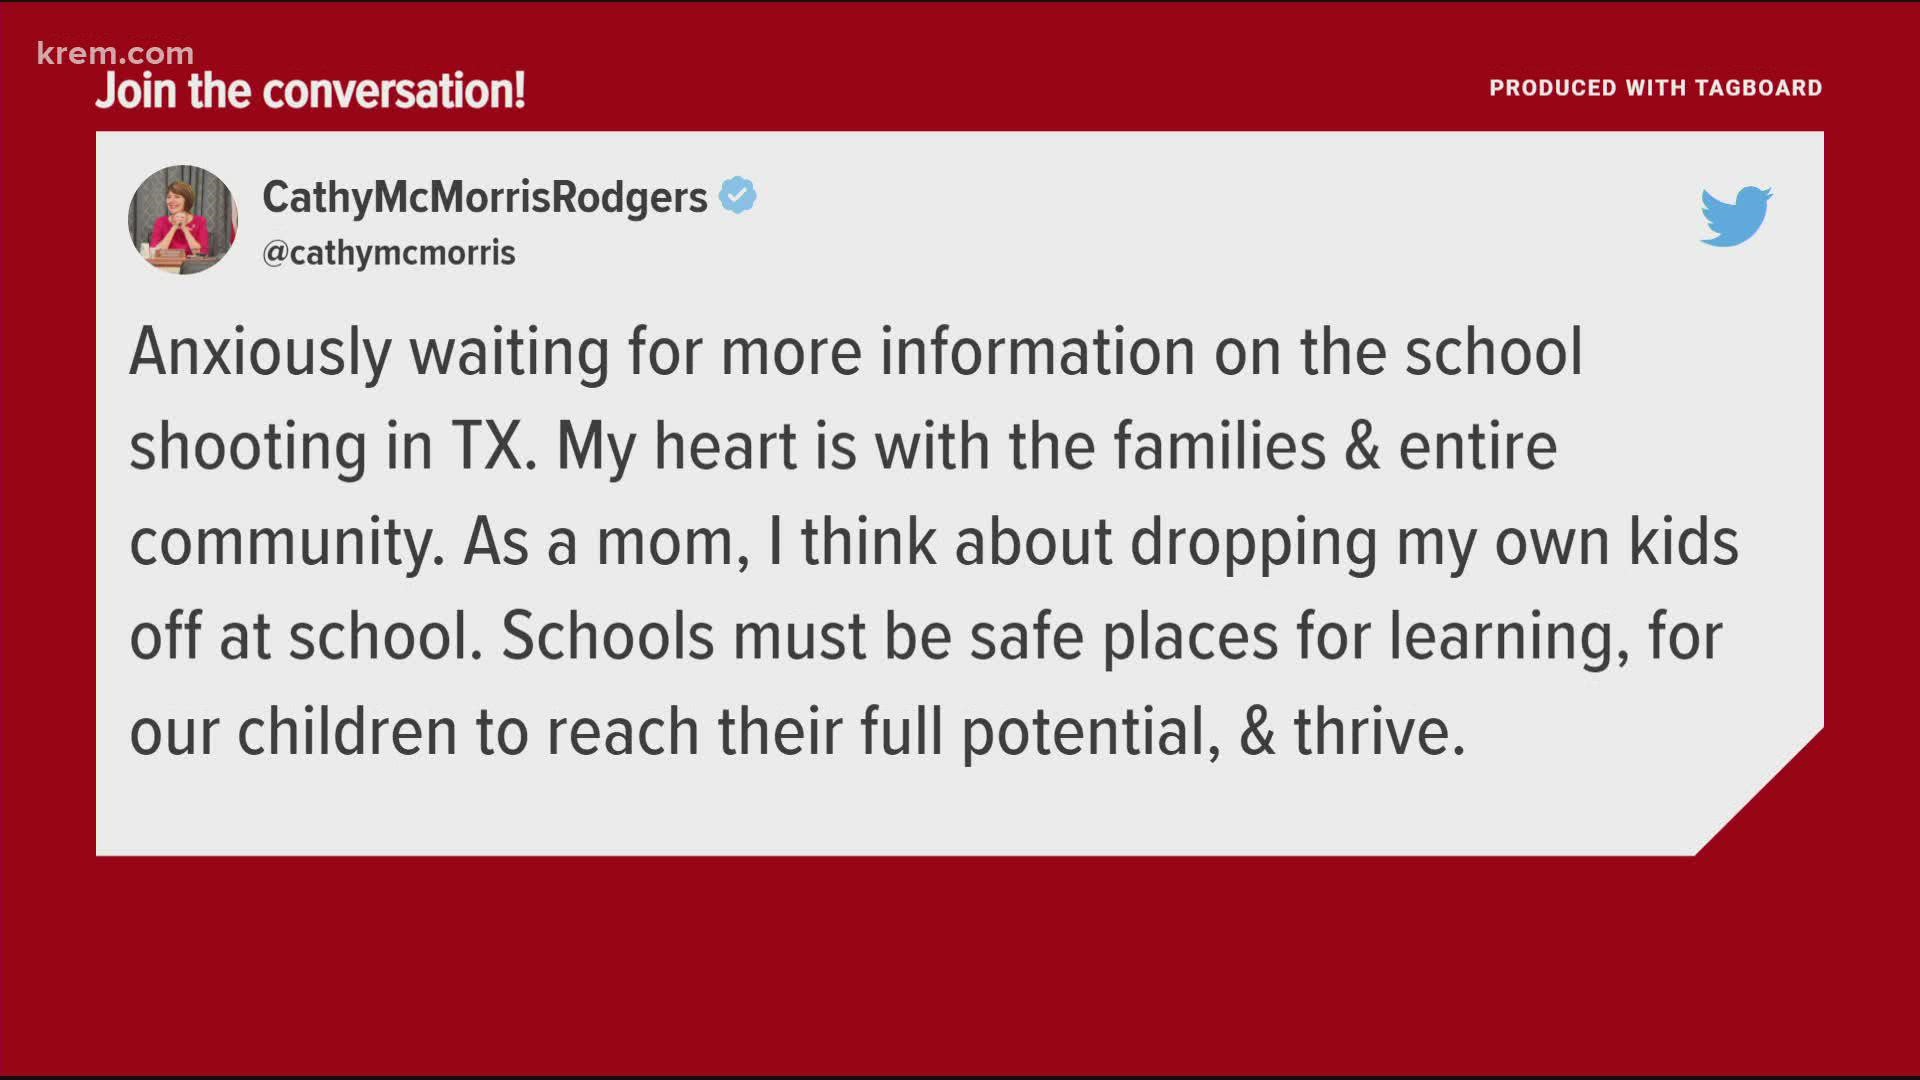 Several politicians including U.S. Representative Cathy McMorris Rodgers, are reacting and tweeting about the Uvalde school shooting on Tuesday.